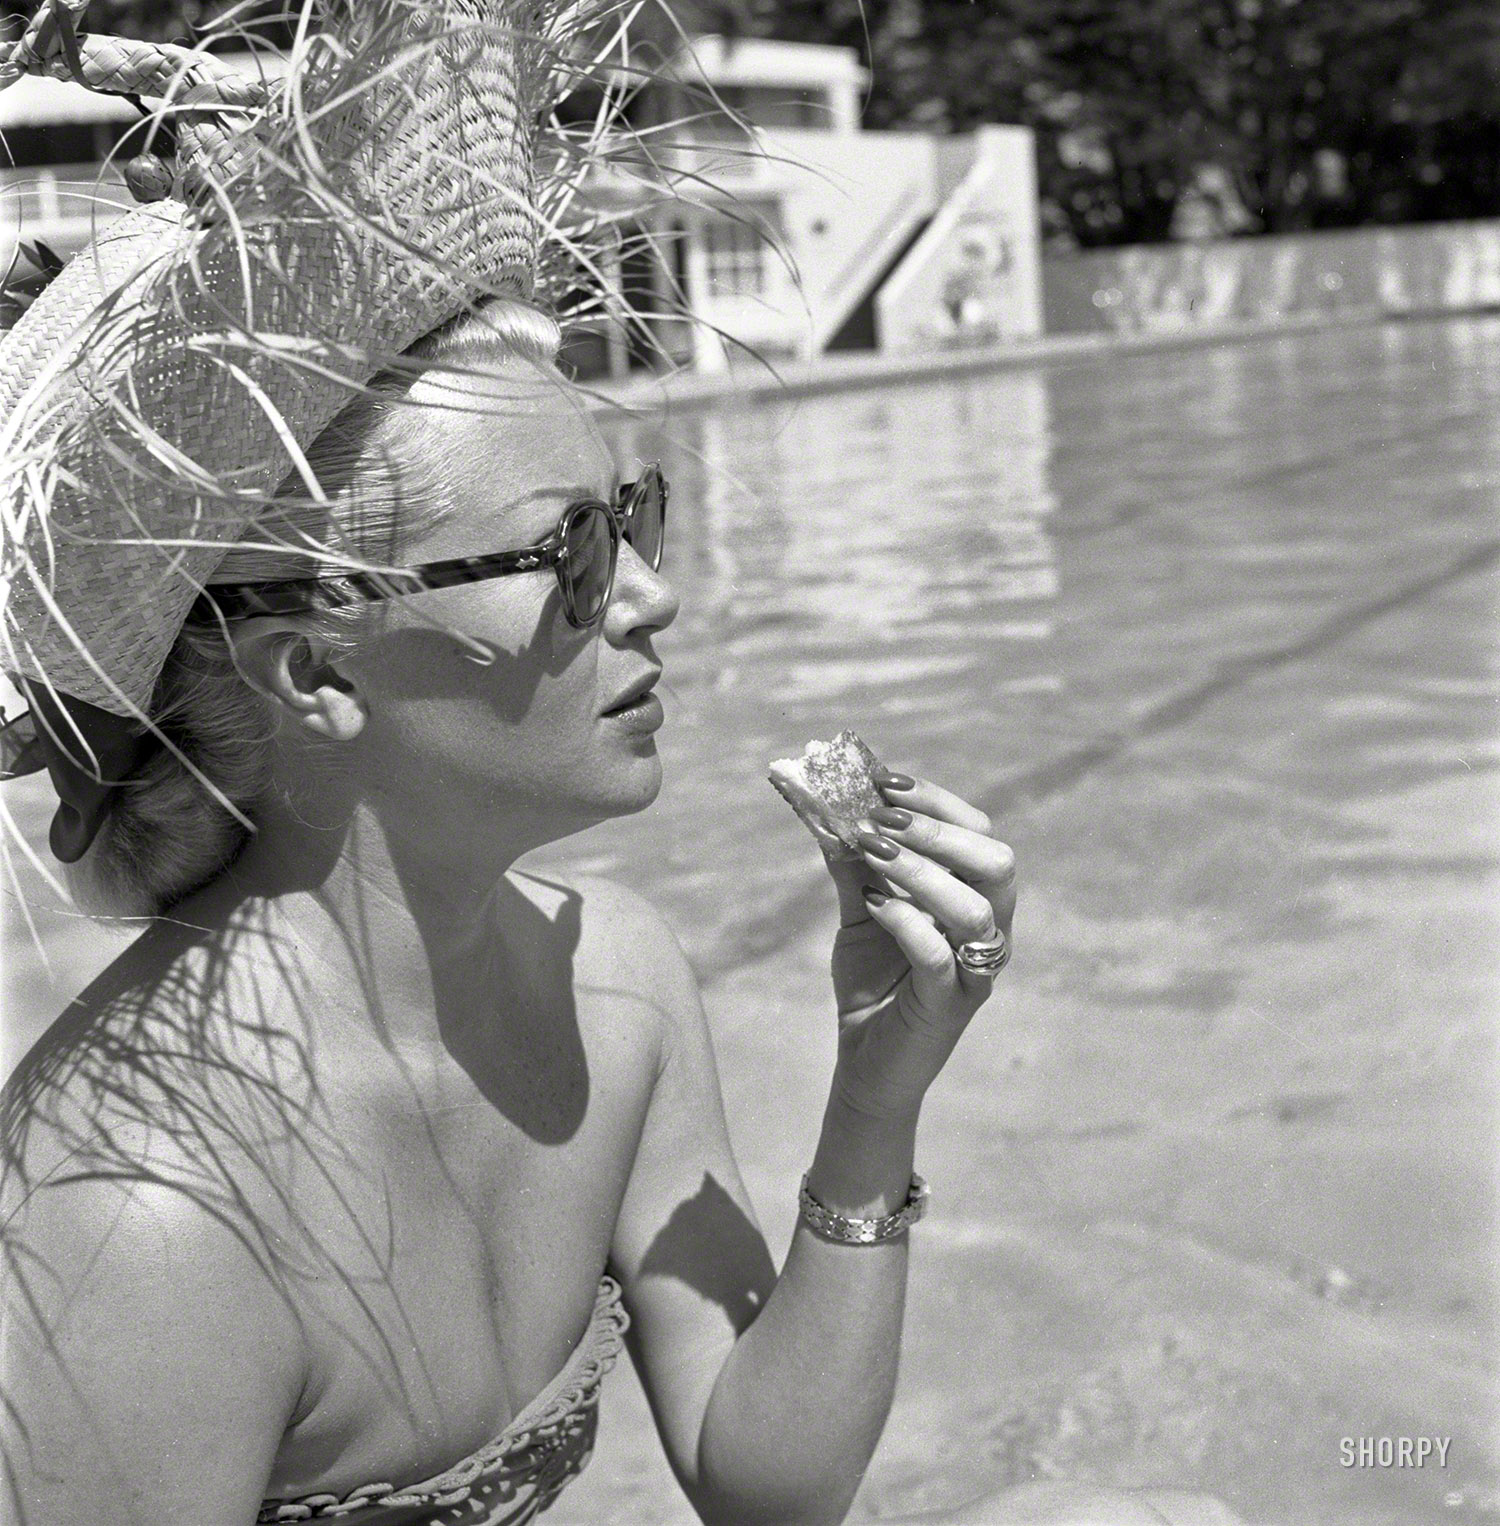 &nbsp; &nbsp; &nbsp; &nbsp; Lana Turner as shot for Look magazine. Which was, basically, an imitation of Life.
June 1951. "Actress Lana Turner lunching poolside at the Coral Casino in Santa Barbara, Calif." From photos by Earl Theisen for Look magazine. View full size.